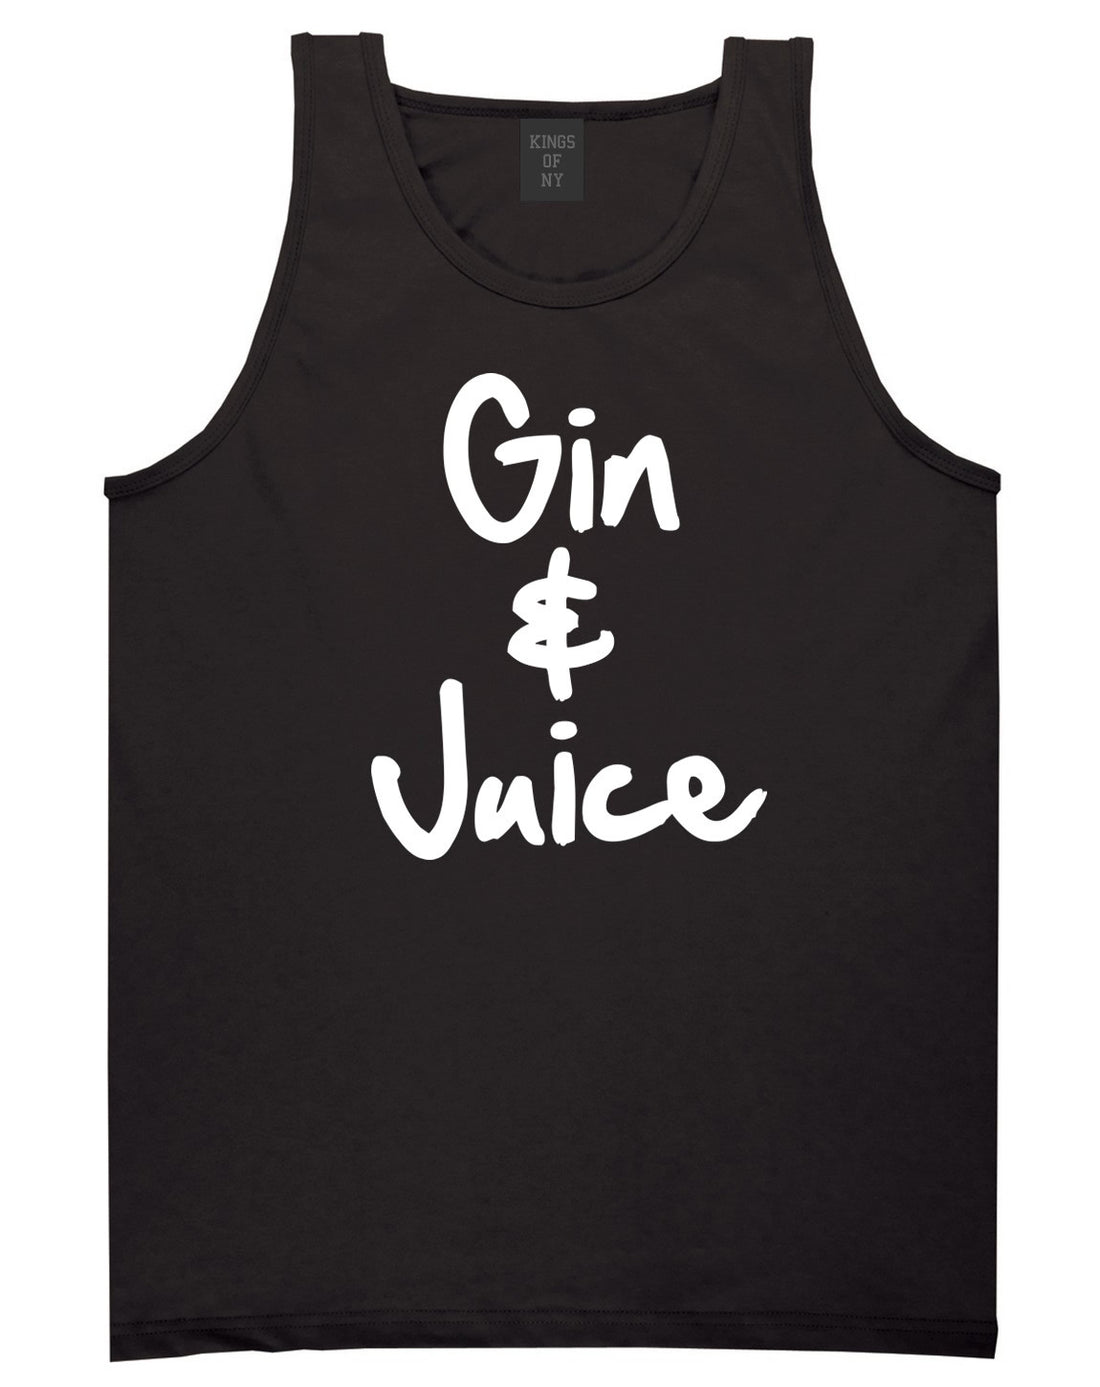 Kings Of NY Gin and Juice Tank Top in Black